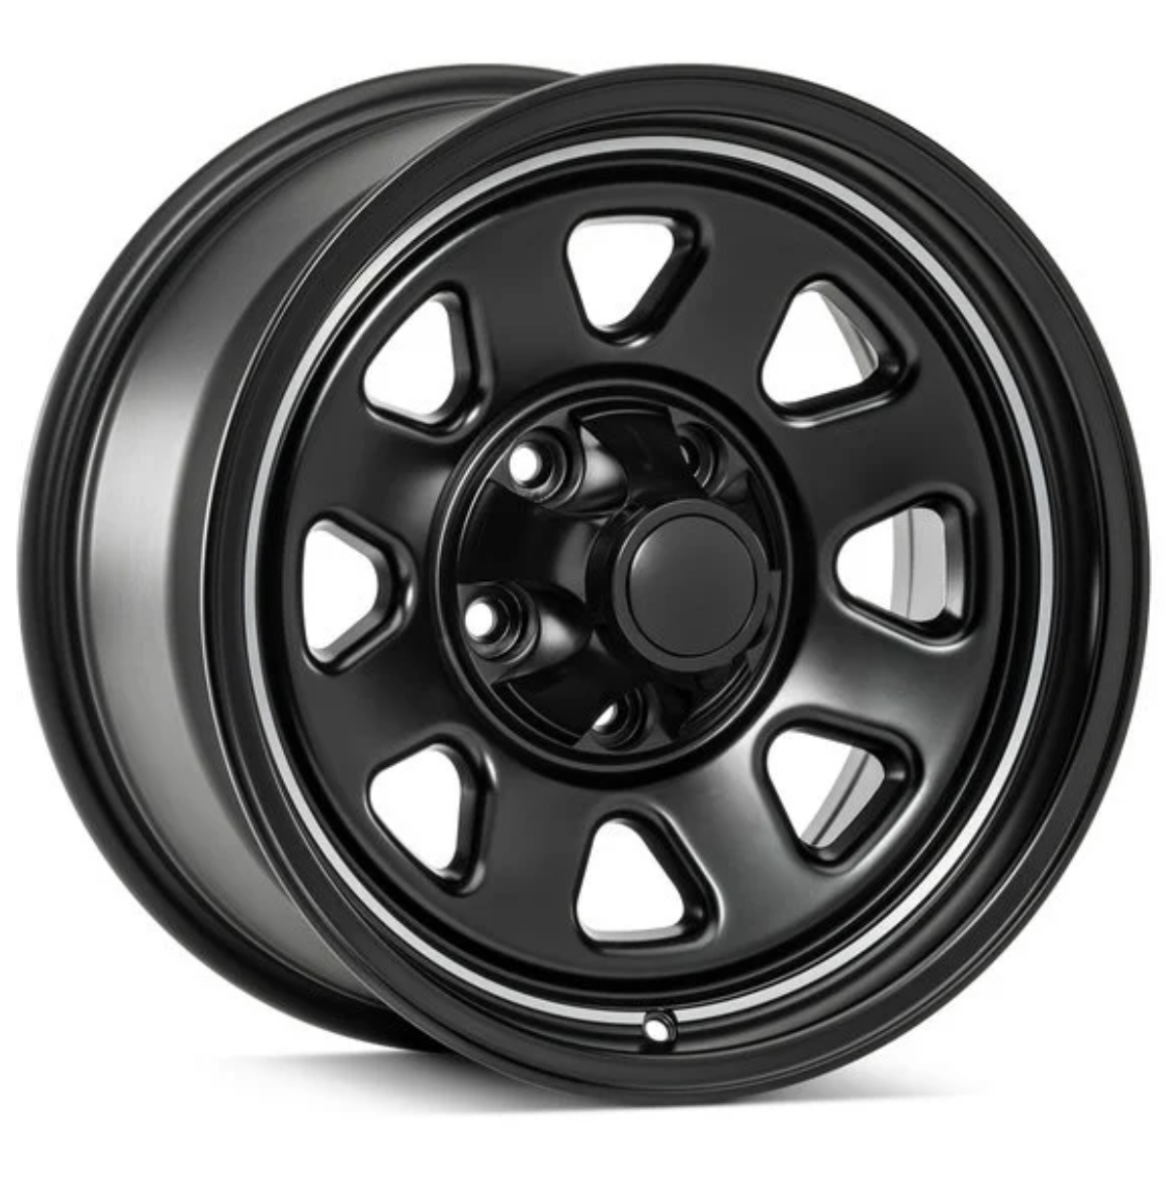 Ford Bronco Bronco Aftermarket Wheels | what options do you want? 1605905107941